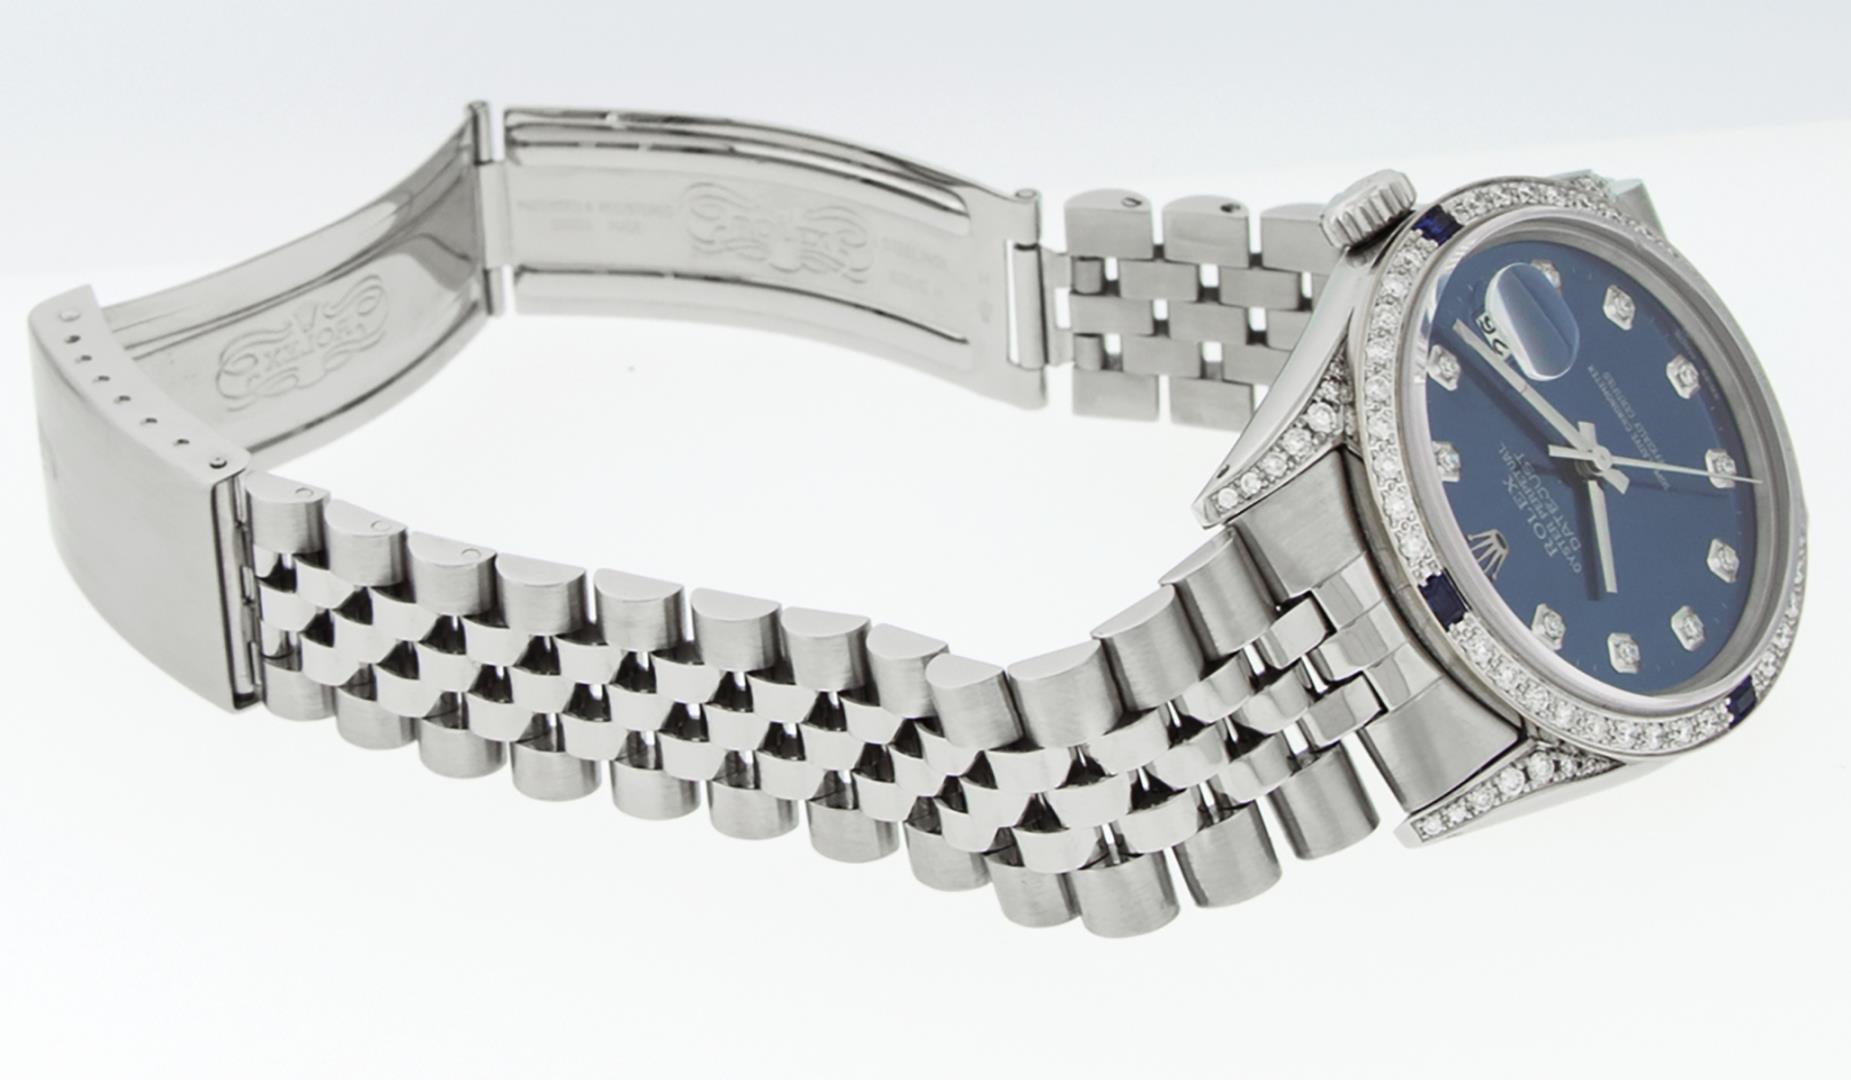 Rolex Mens Stainless Steel Sapphire and Diamond Datejust